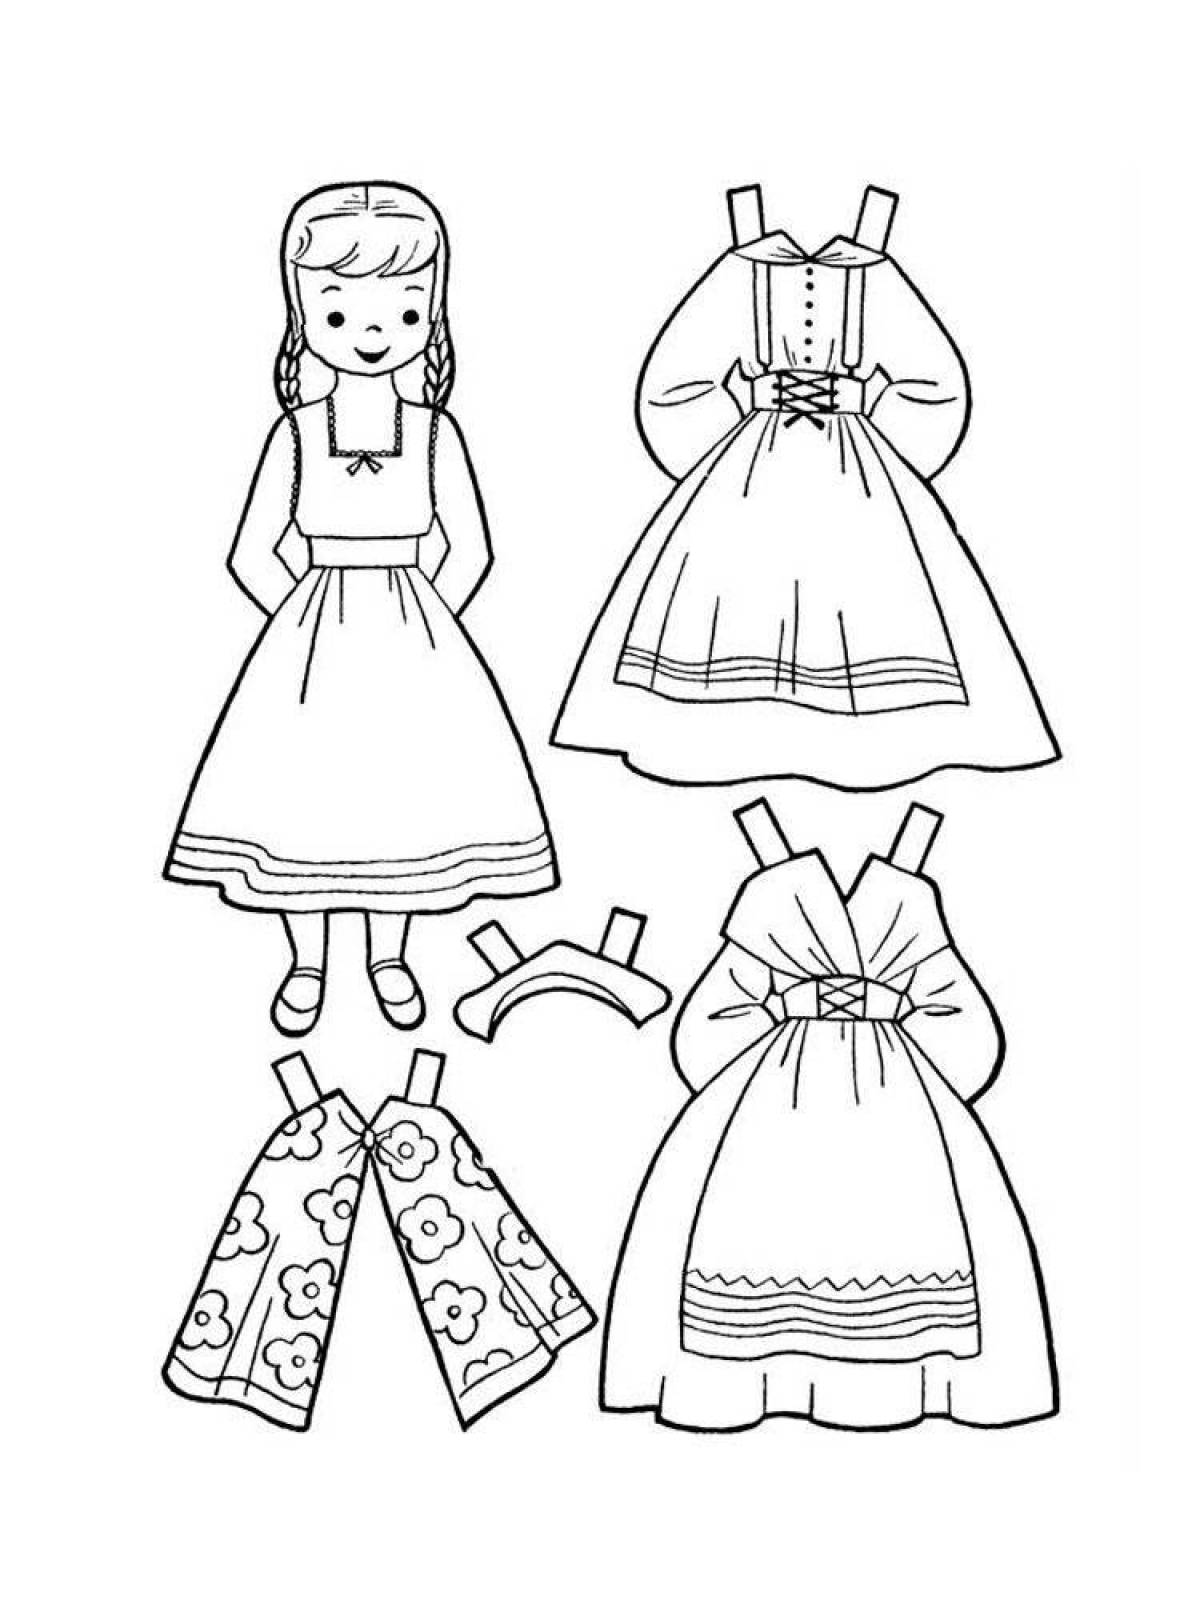 Gorgeous doll coloring dress